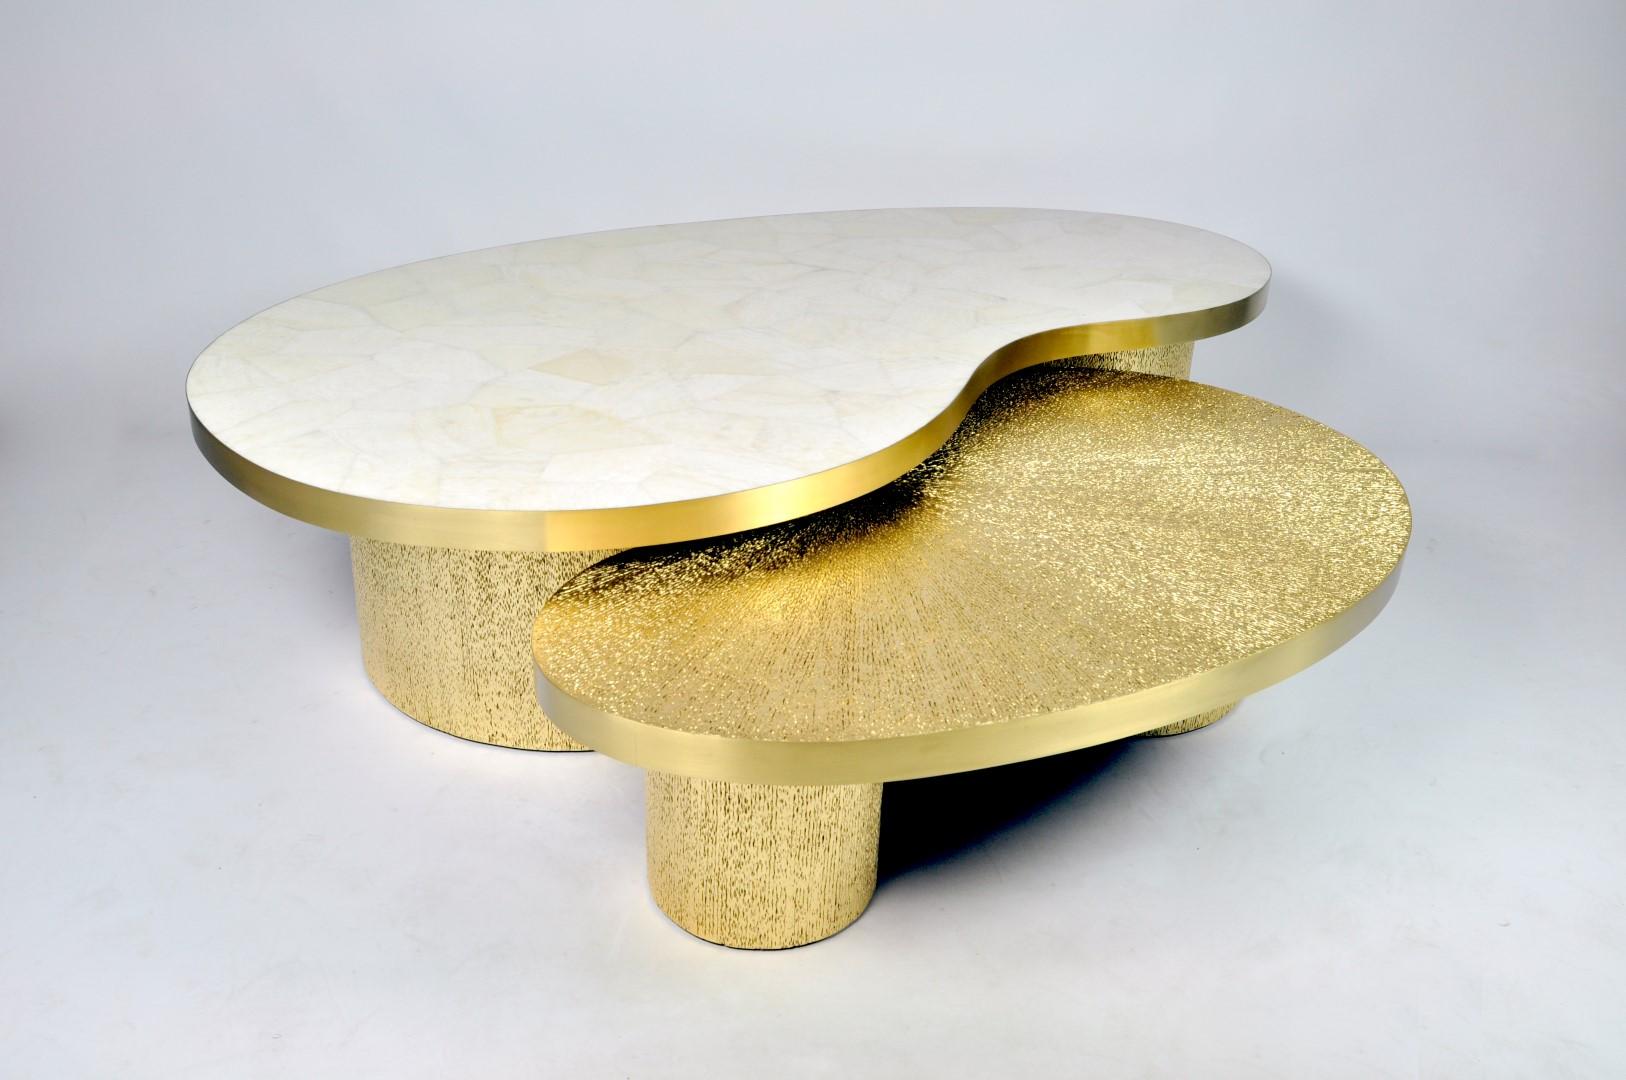 This set of 2 coffee tables with a bean shape is made of various materials.
The highest table has a top in white rock crystal and the lowest table has a top in gilded vegetal fiber marquetry.
Both tables tops have edges in brushed brass.
The two